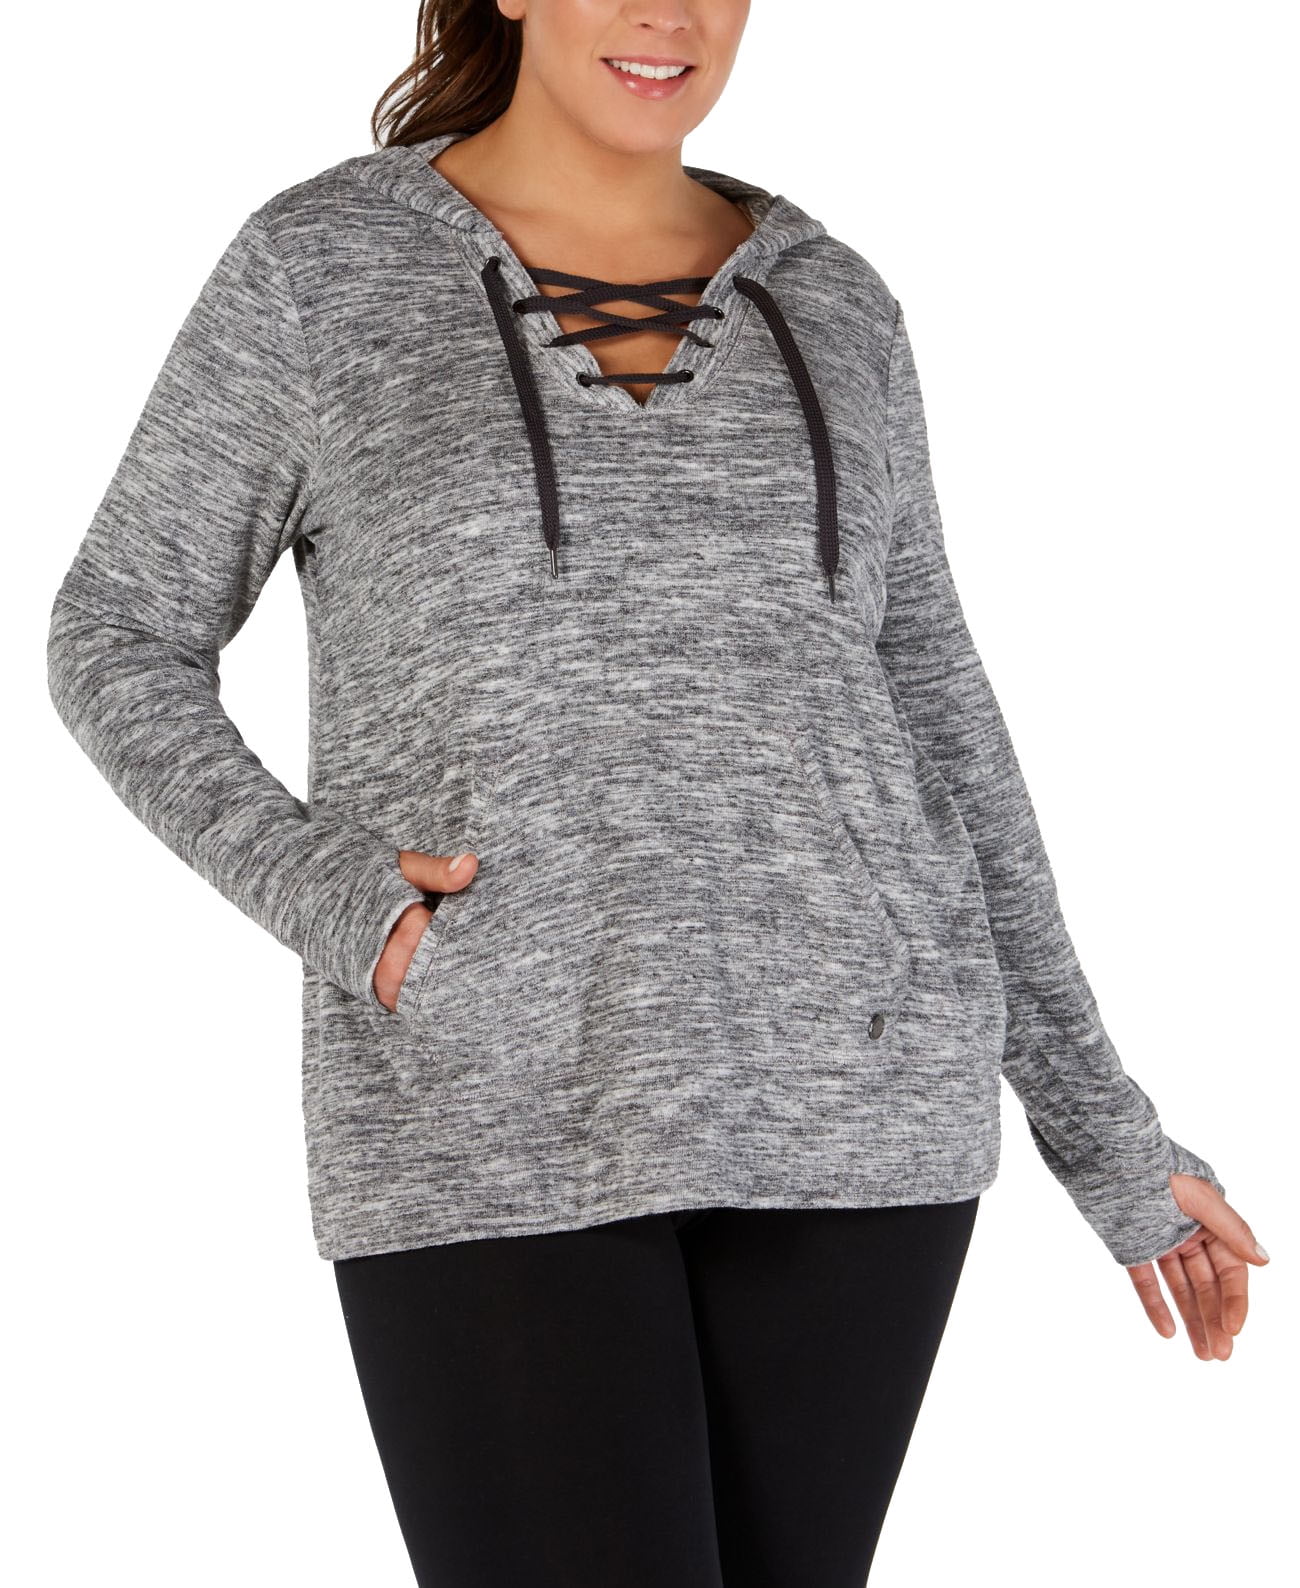 Ideology Womens Lace-Up Sides Hoodie Charcoal Heather 